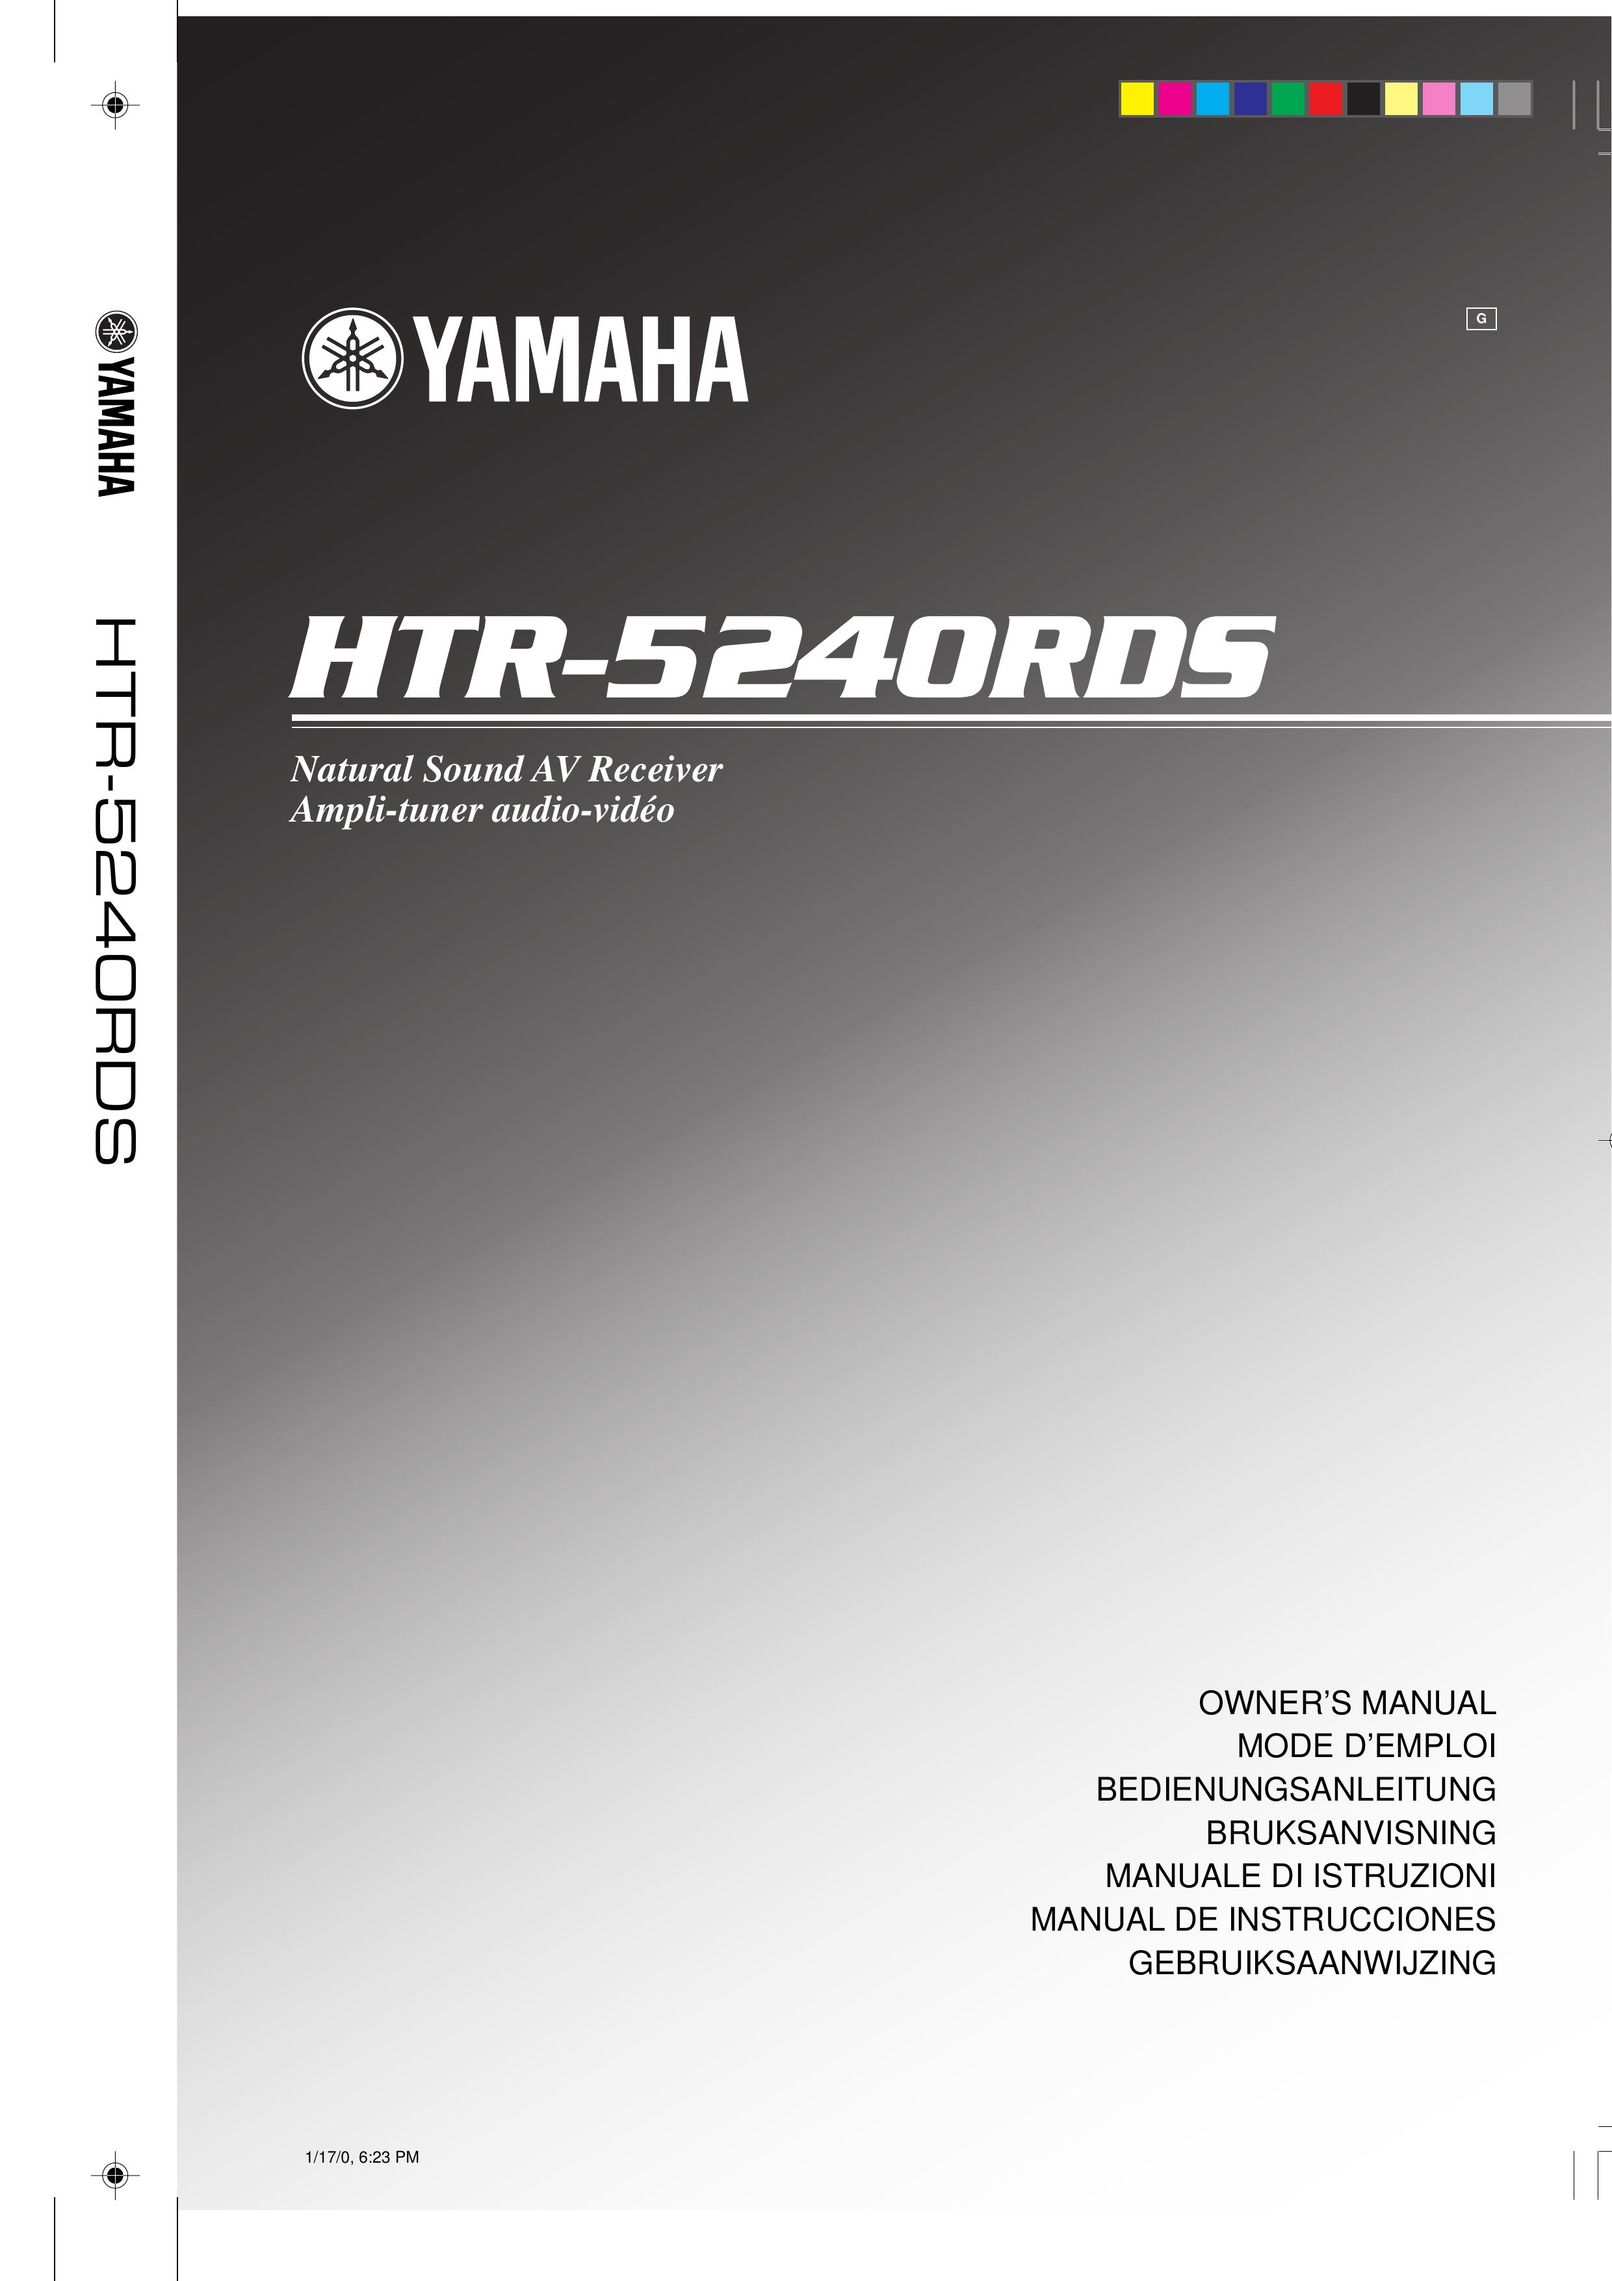 Yamaha HTR-5240RDS Stereo Receiver User Manual